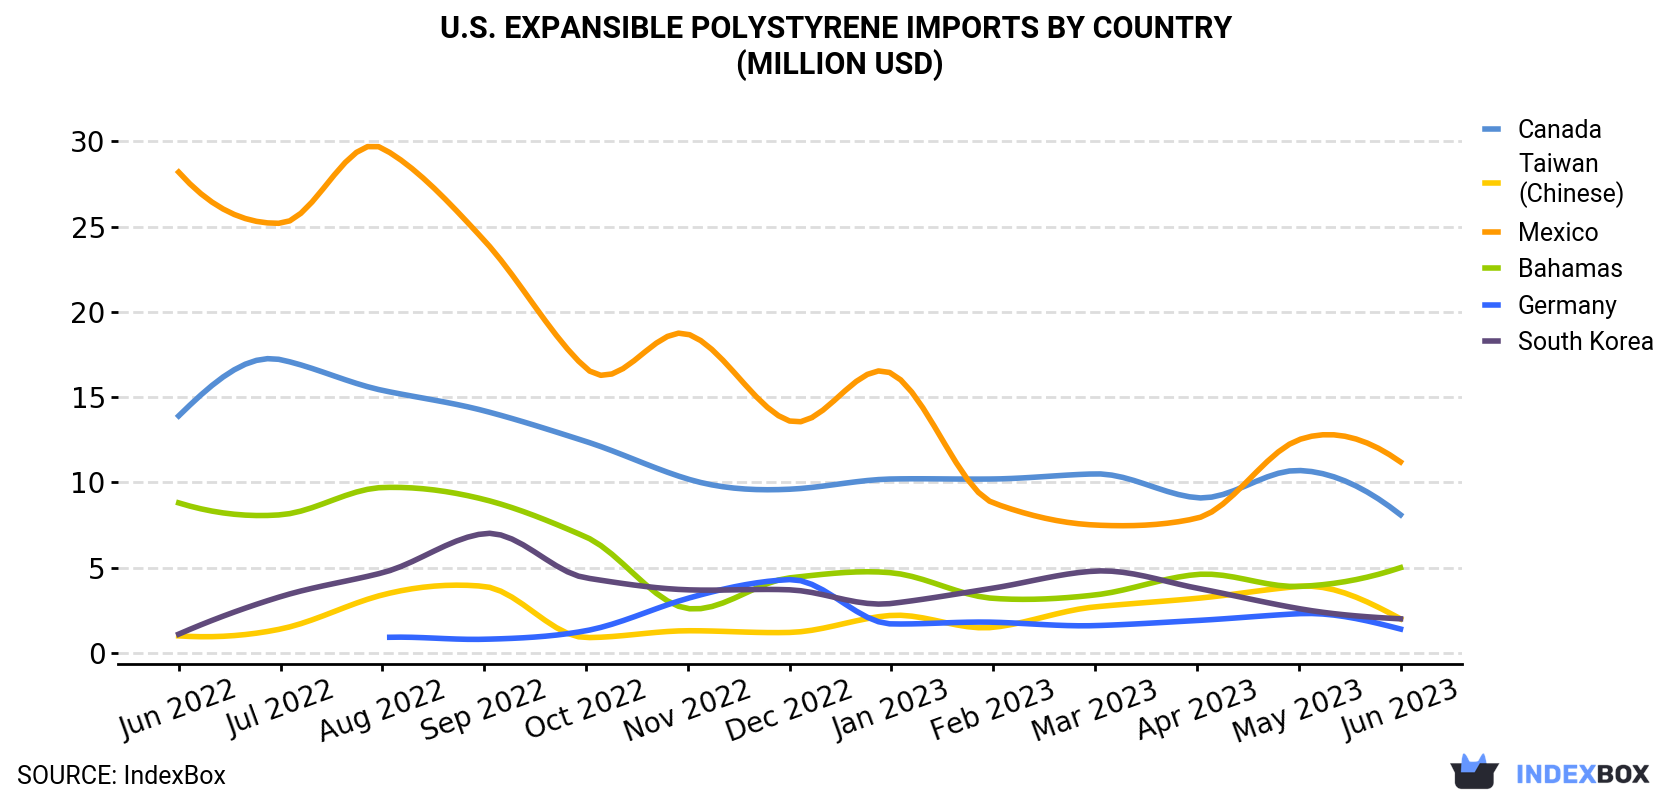 U.S. Expansible Polystyrene Imports By Country (Million USD)